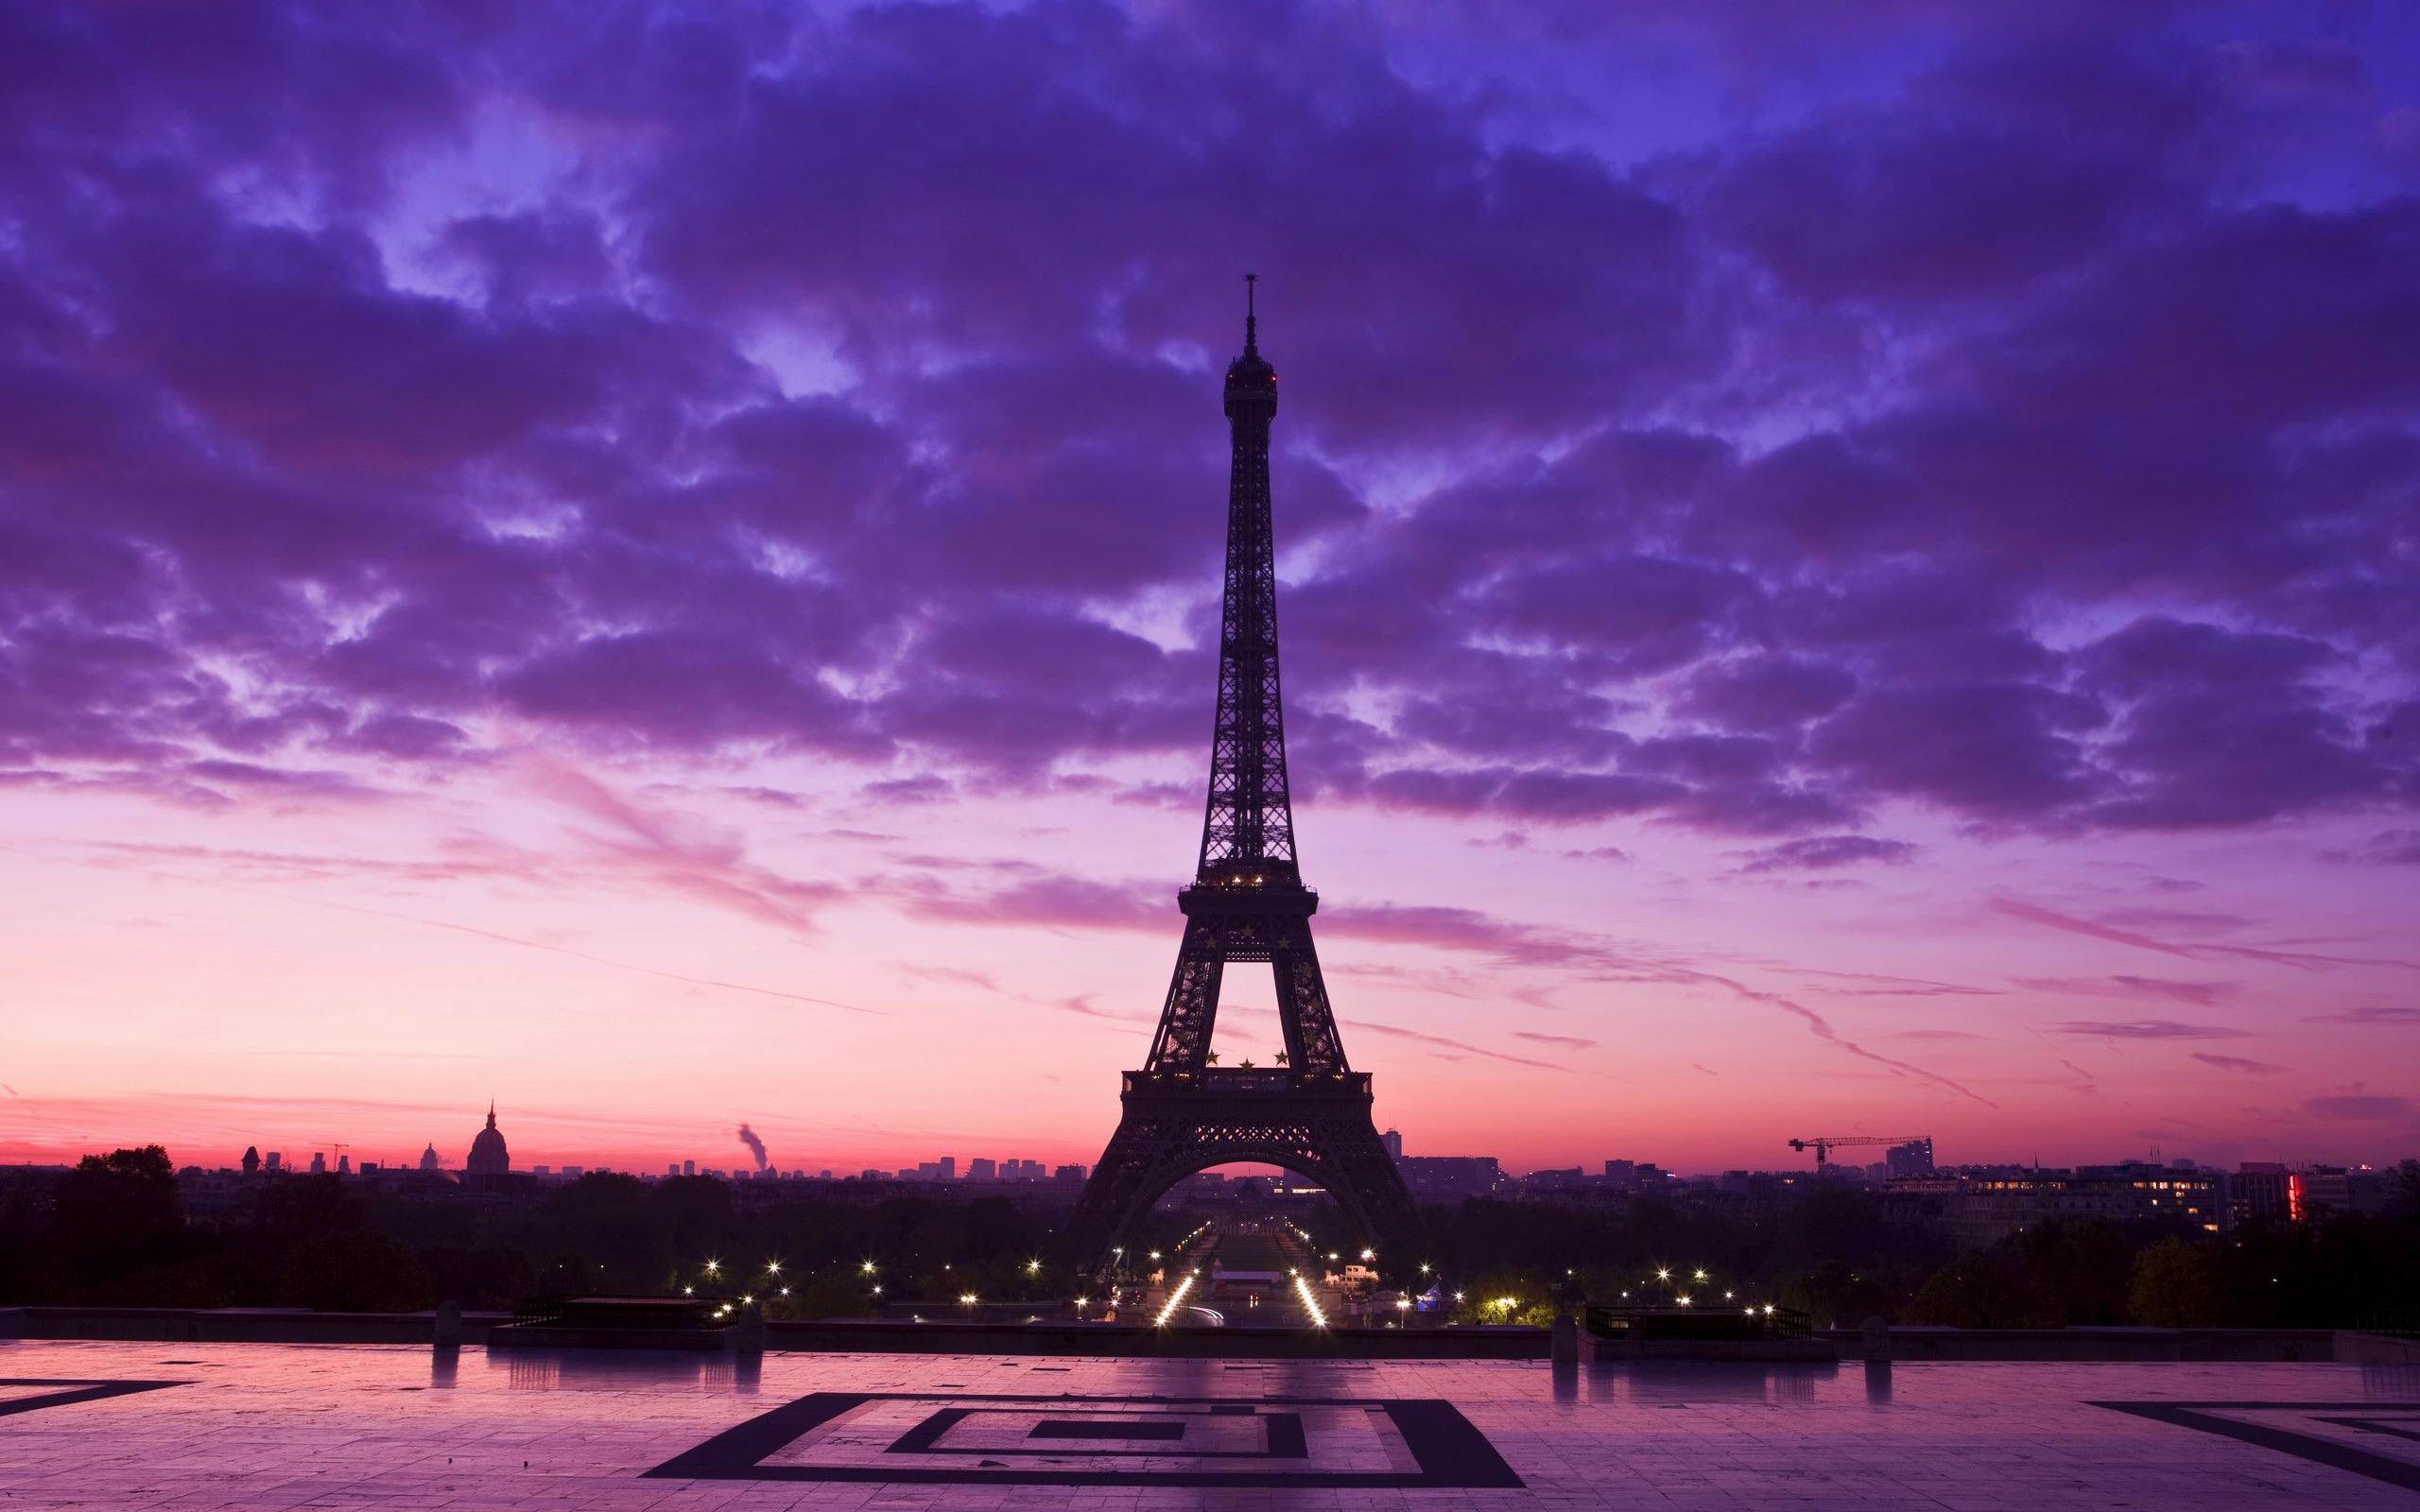 Holiday Beautiful Purple Sky In Above The Eiffel Tower Paris When Sunset Moment HD Wallpaper Paris of Romantic Love City Wallpaper